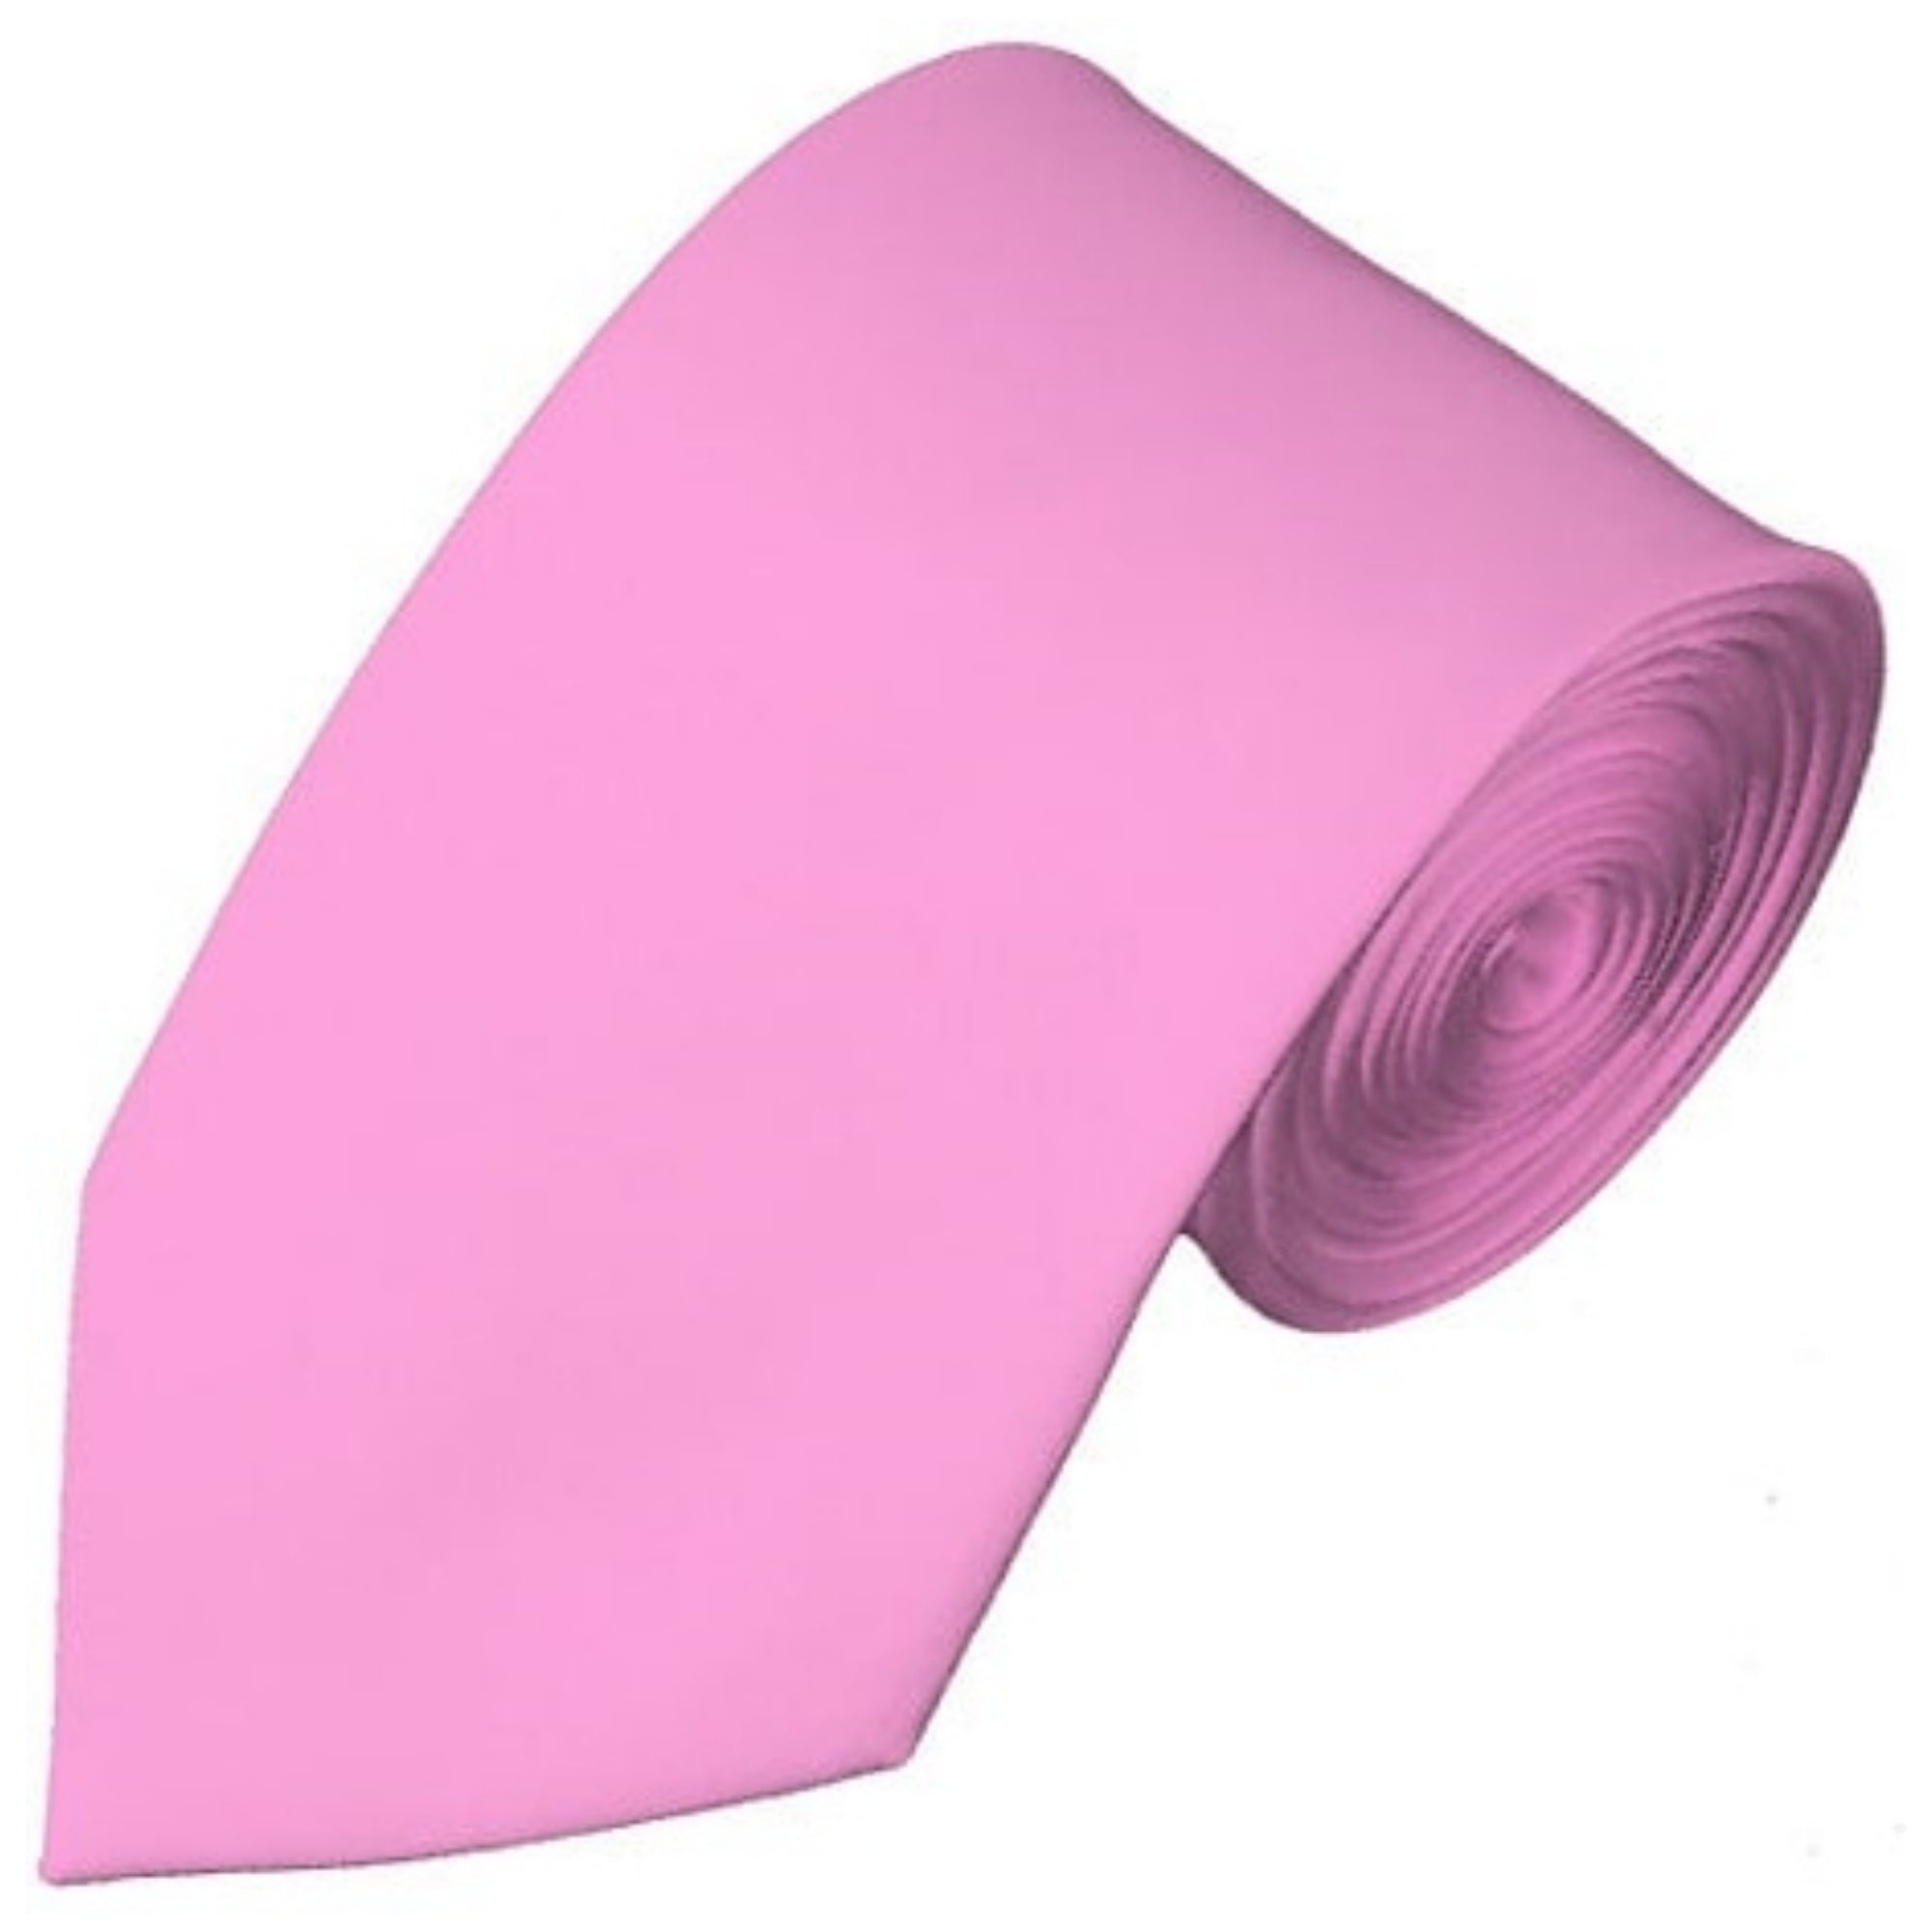 TheDapperTie Men's Solid Color Slim 2.75 Inch Wide And 58 Inch Long Neckties Neck Tie TheDapperTie Pink  